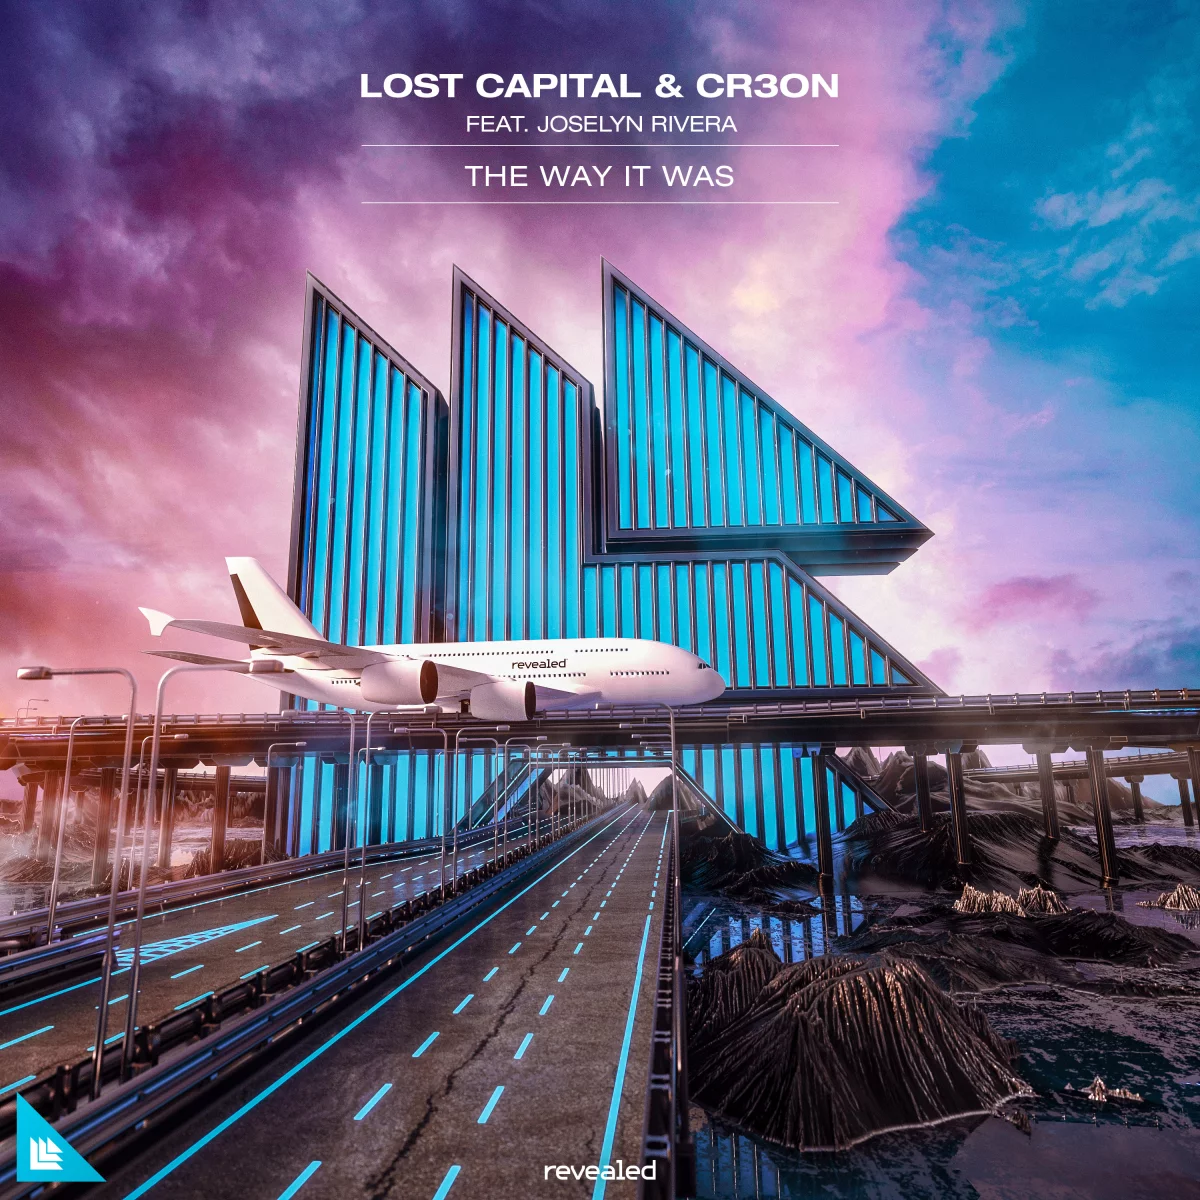 The Way It Was - Lost Capital⁠ & Cr3on⁠ feat. Joselyn Rivera⁠